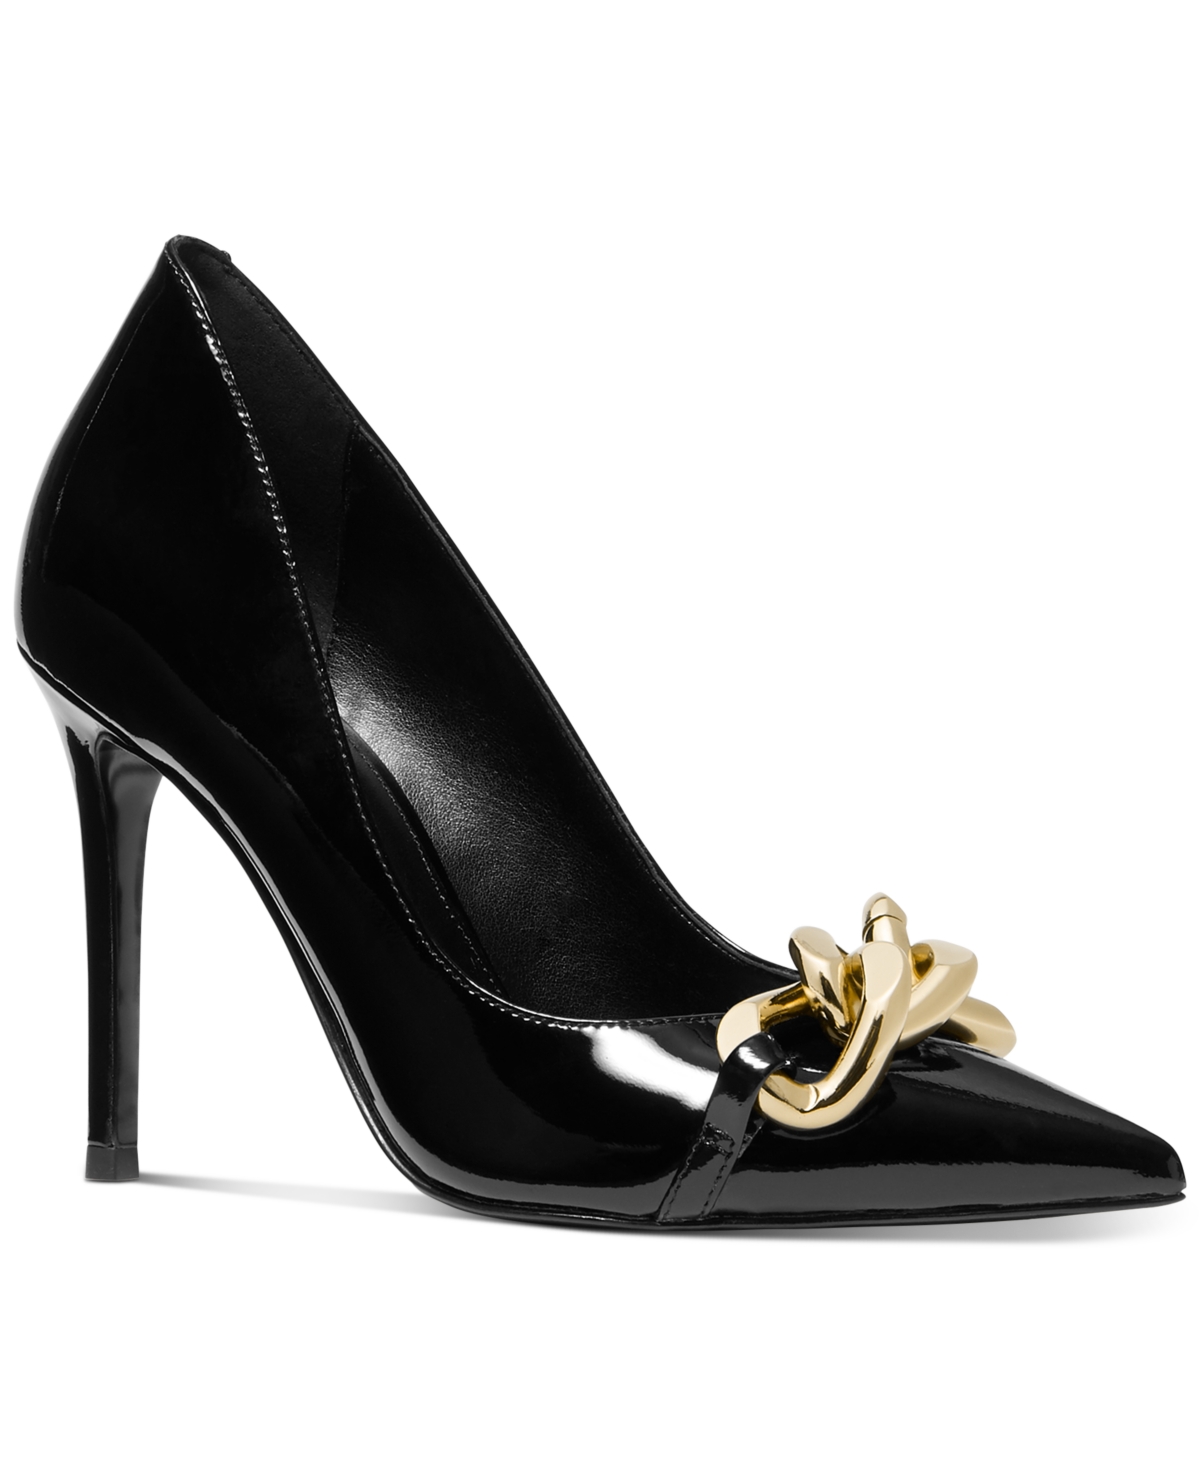 UPC 195512621130 product image for Michael Michael Kors Women's Scarlett Pointed-Toe Chain Pumps Women's Shoes | upcitemdb.com